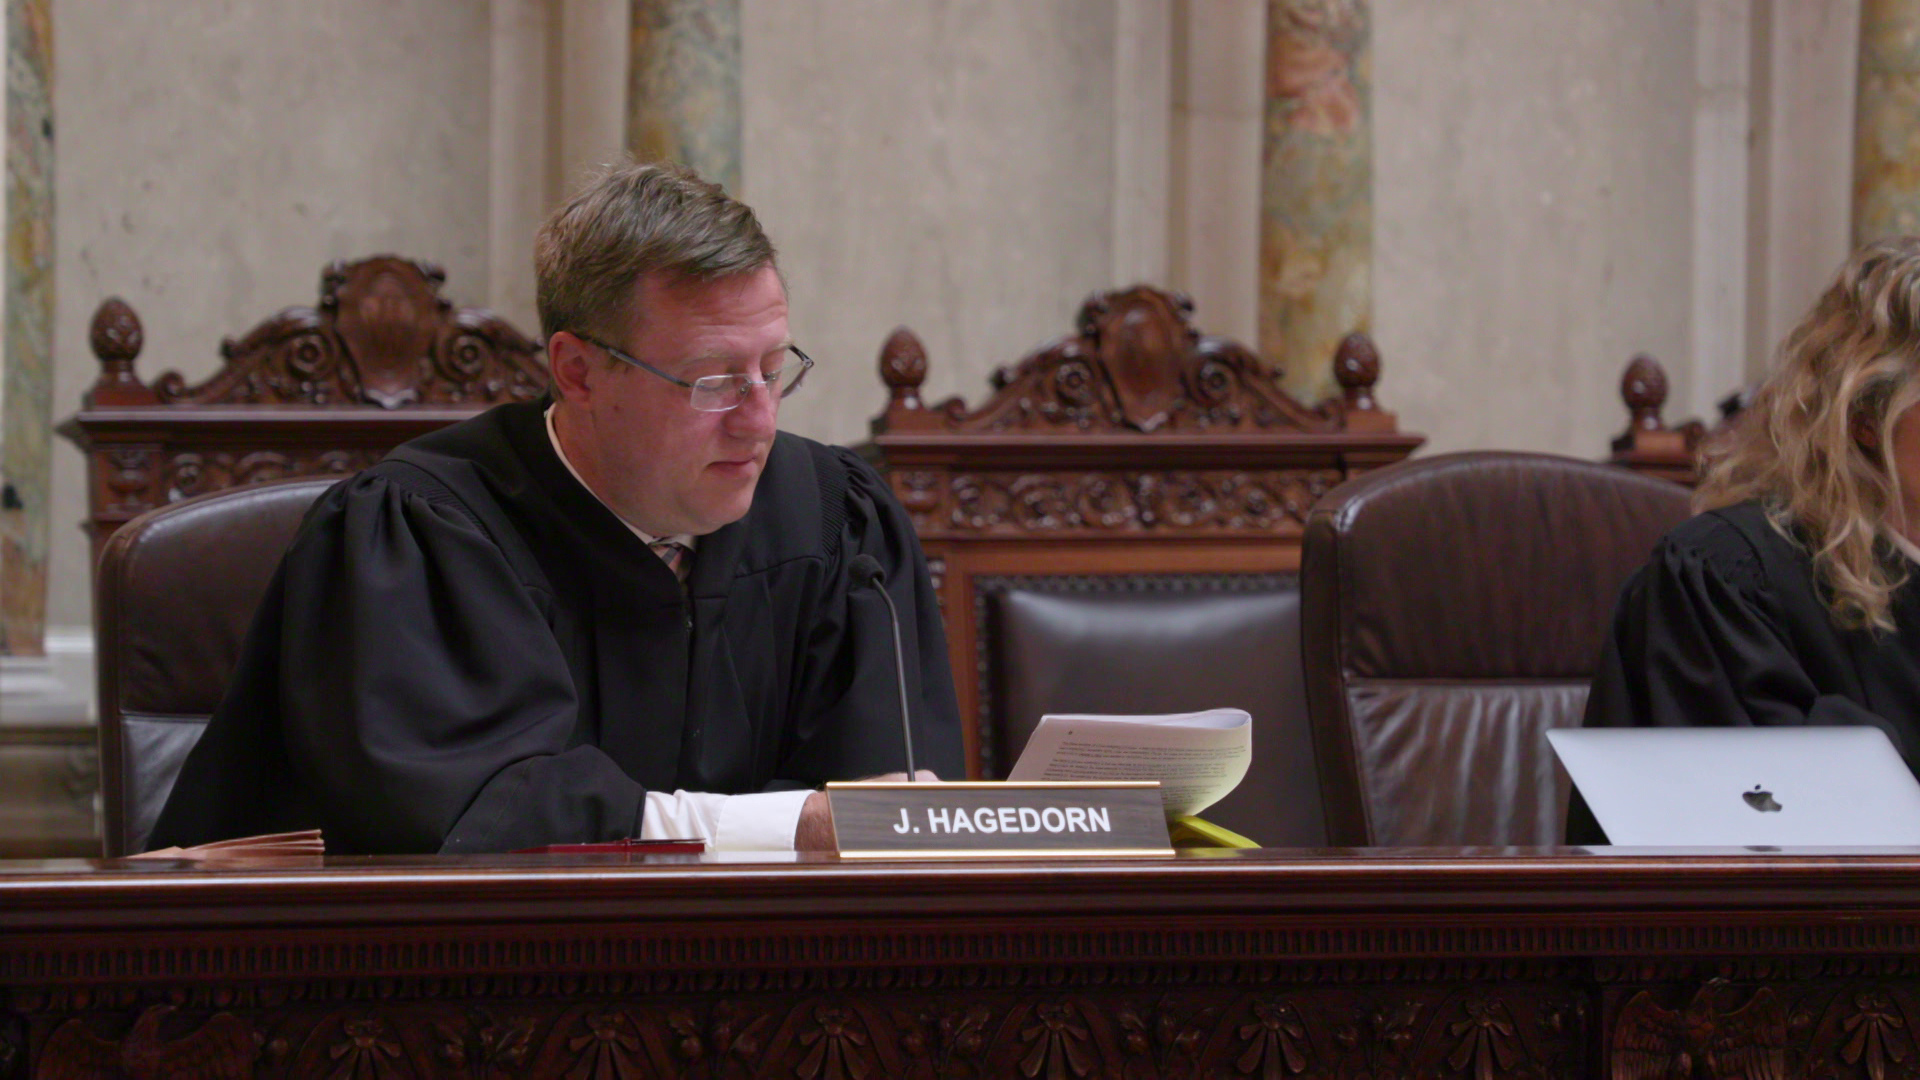 Brian Hagedorn, wearing judicial robes, looks at a paper document and speaks while sitting in a high-backed leather and wood chair behind a dais with a nameplate reading "J. Hagedorn" in a room with marble walls and pillars.